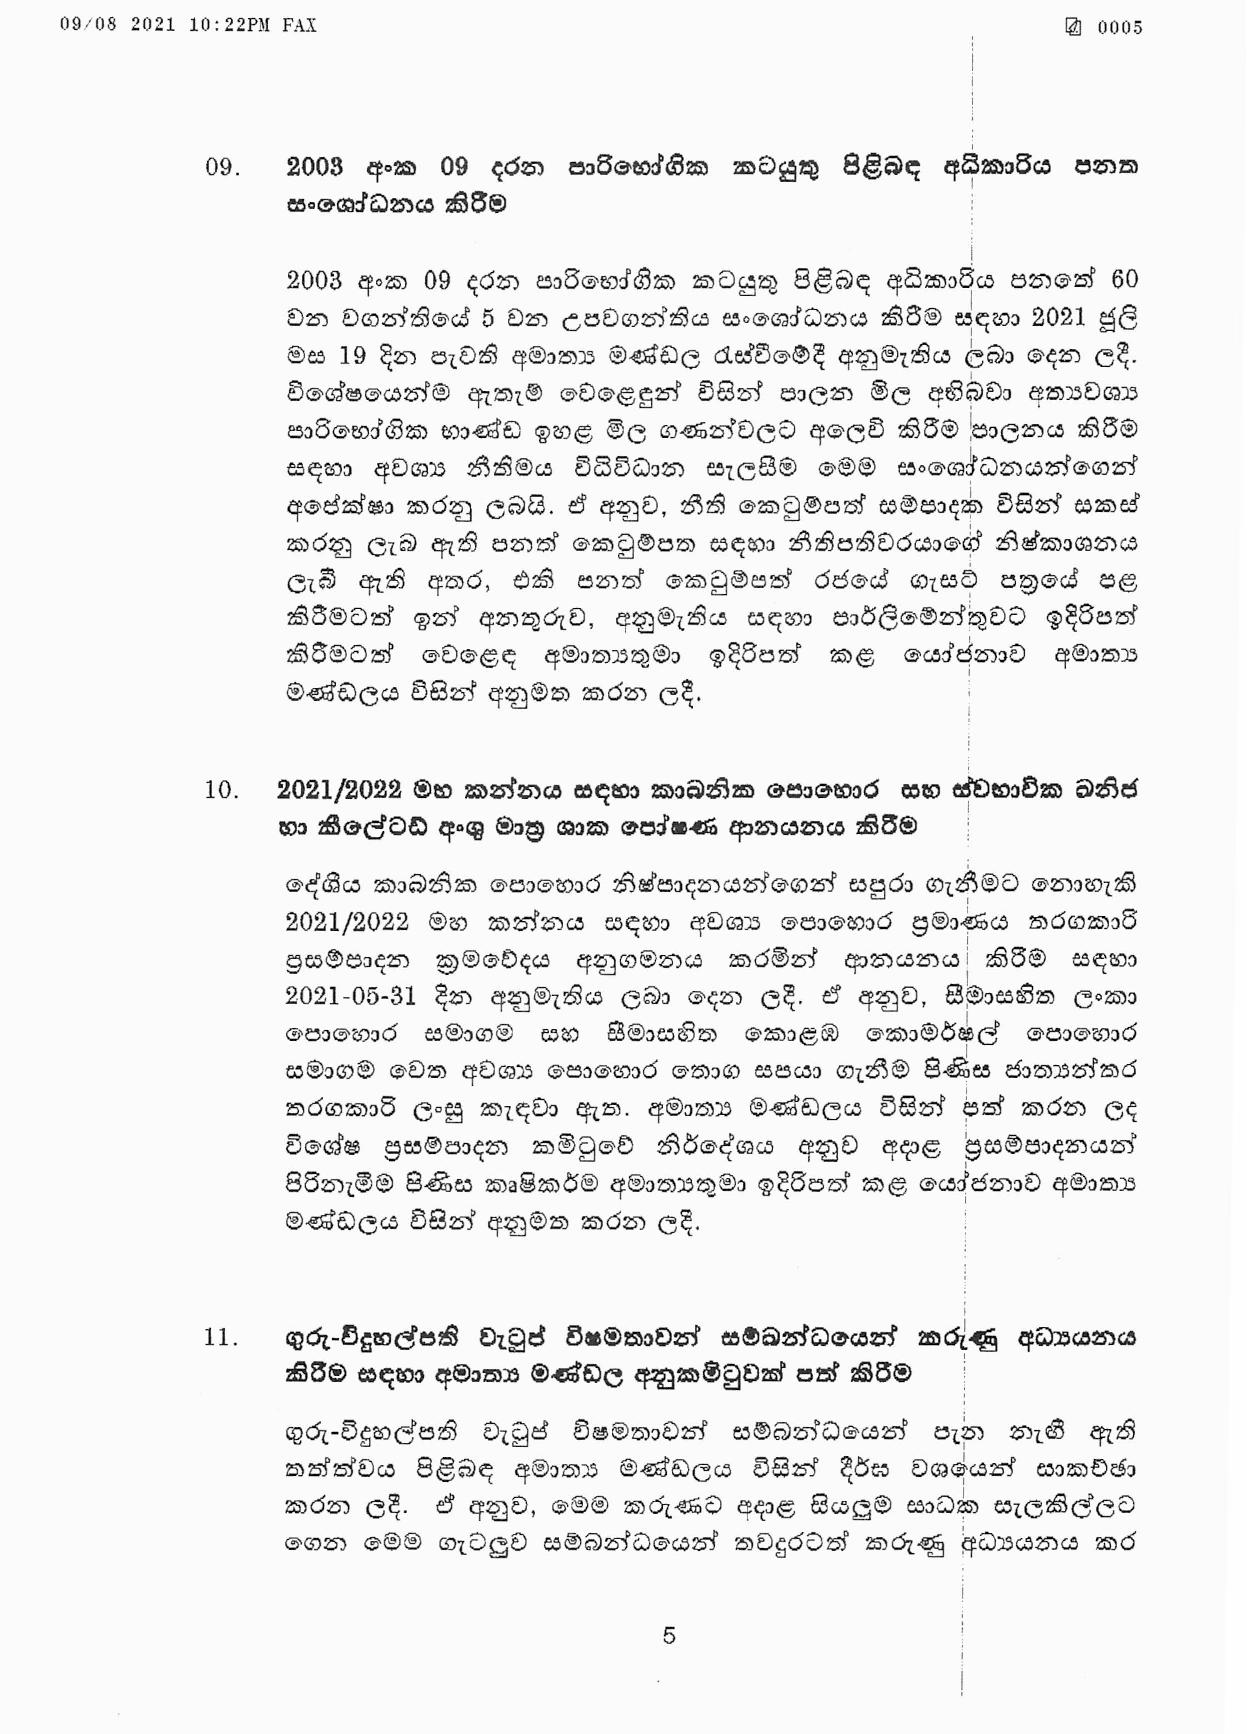 Cabinet Decision on 09.08.2021 page 005